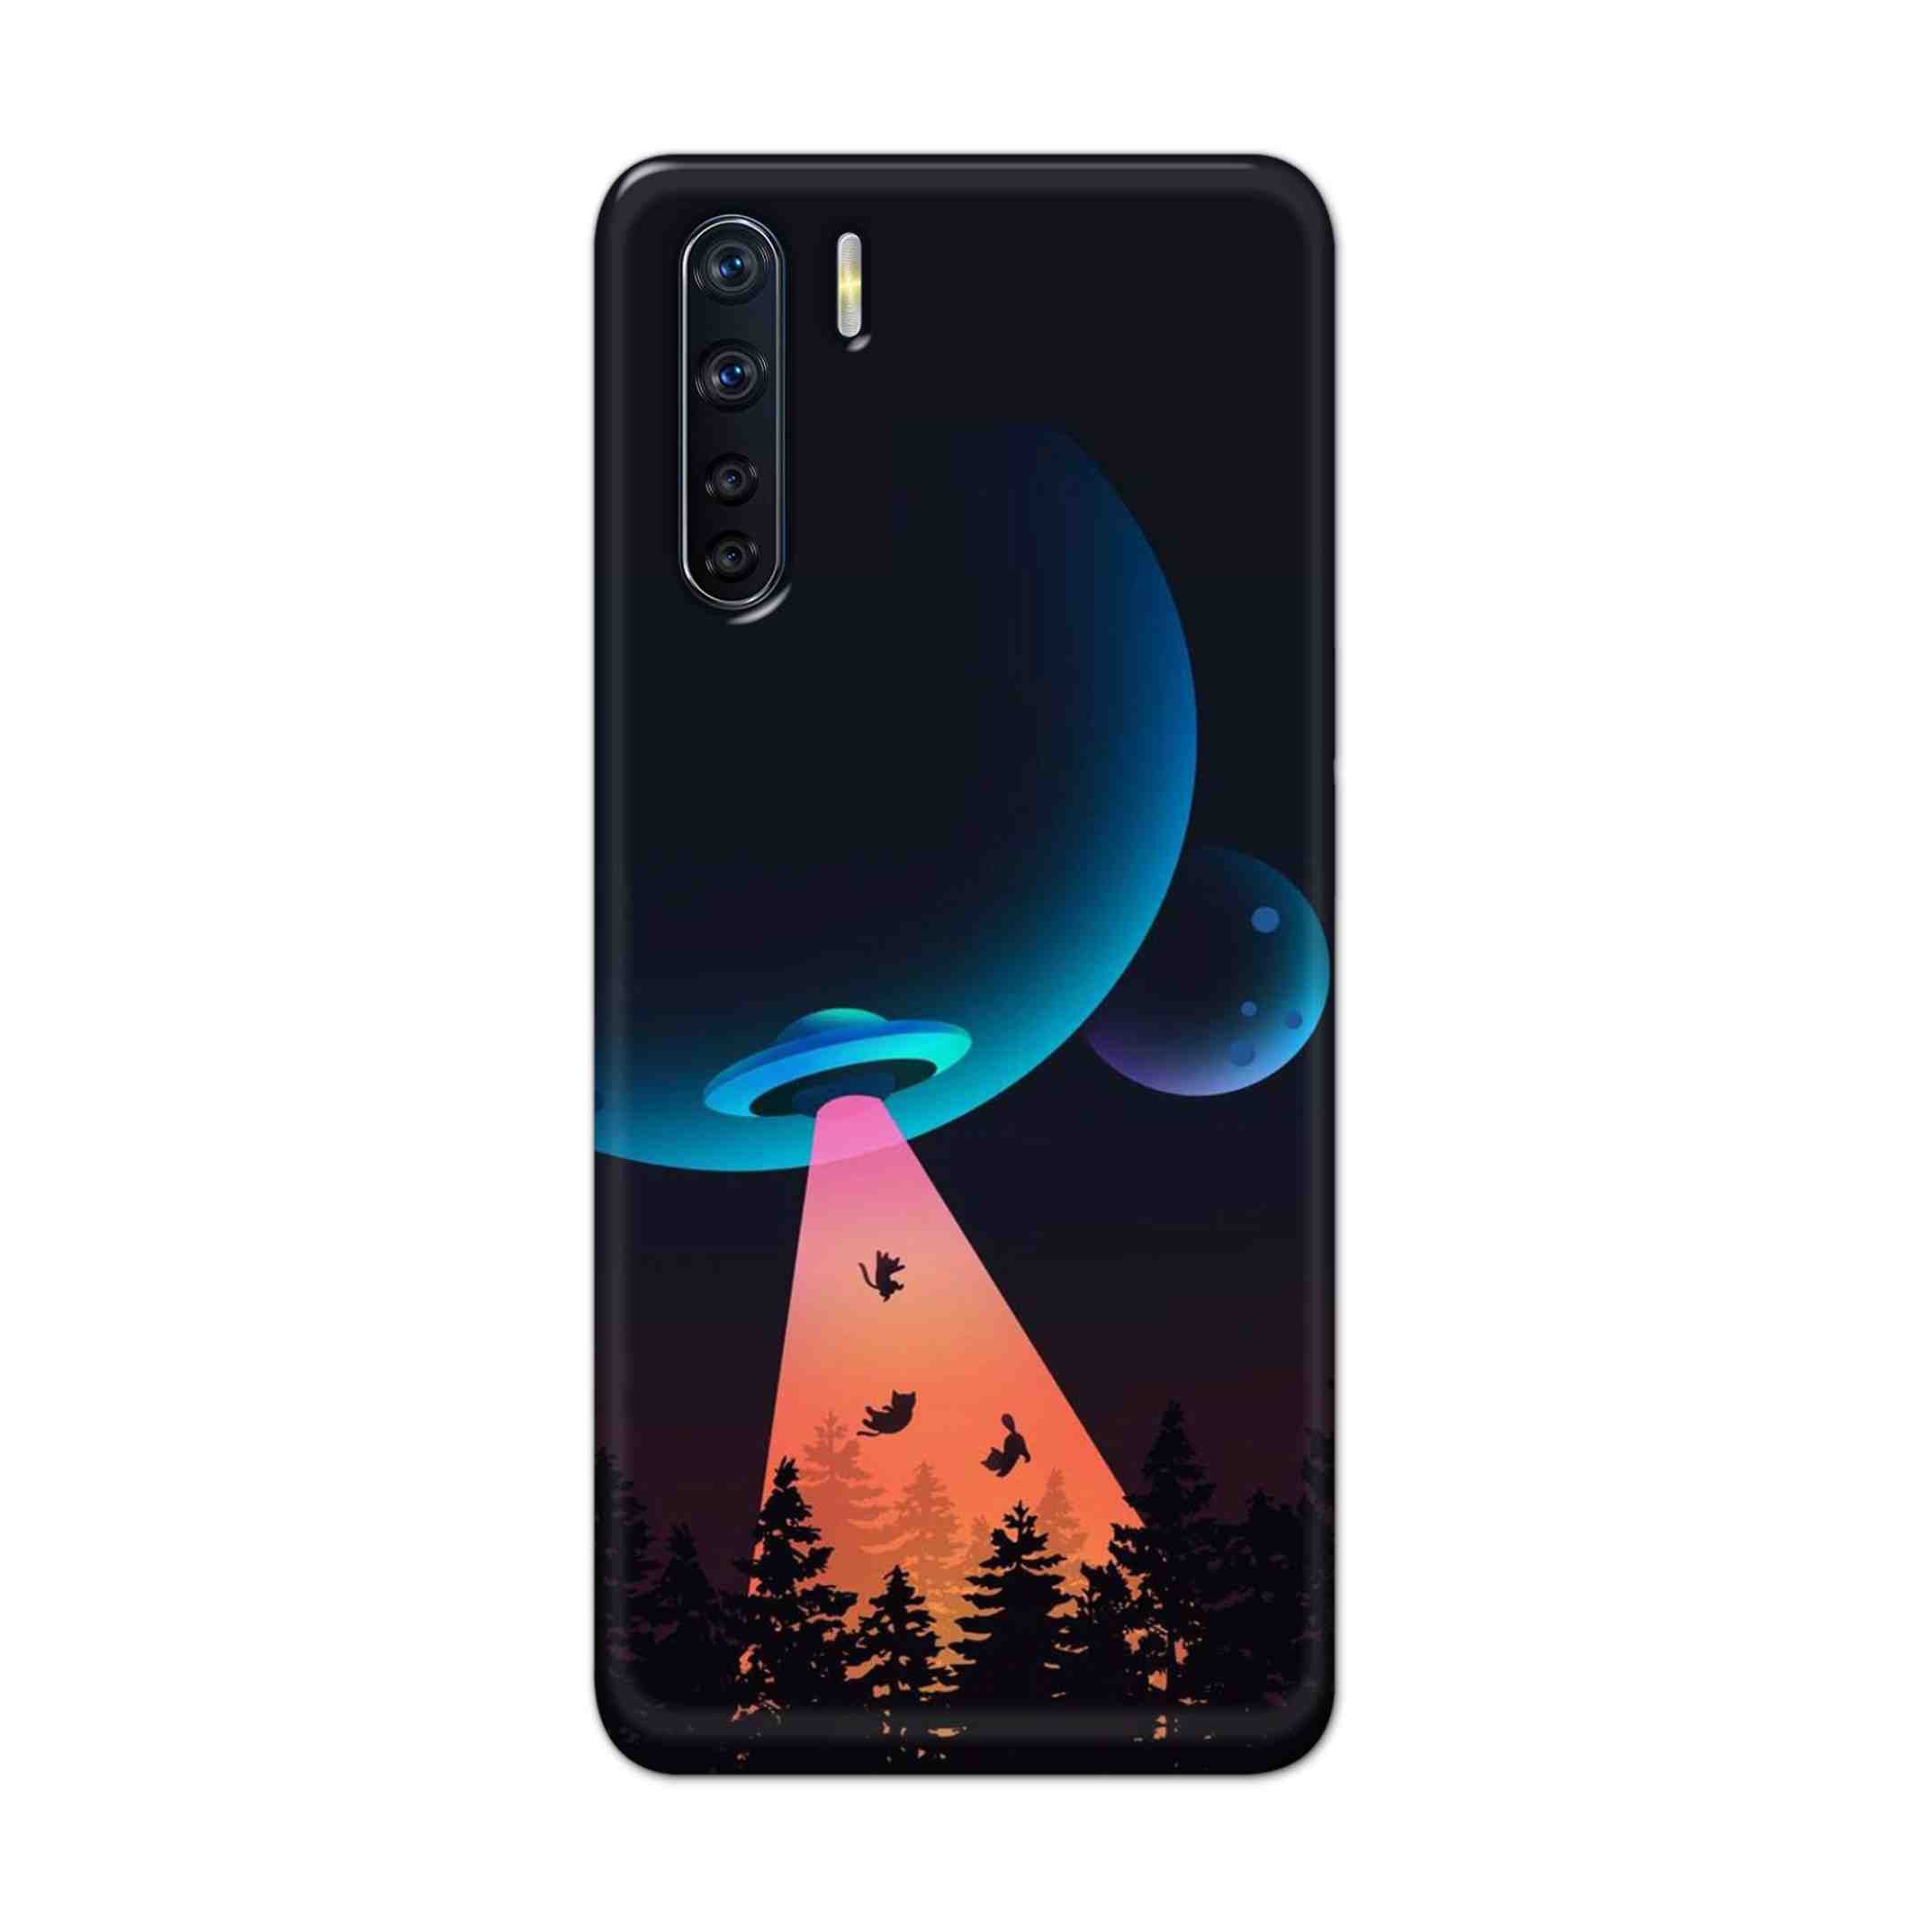 Buy Spaceship Hard Back Mobile Phone Case Cover For OPPO F15 Online